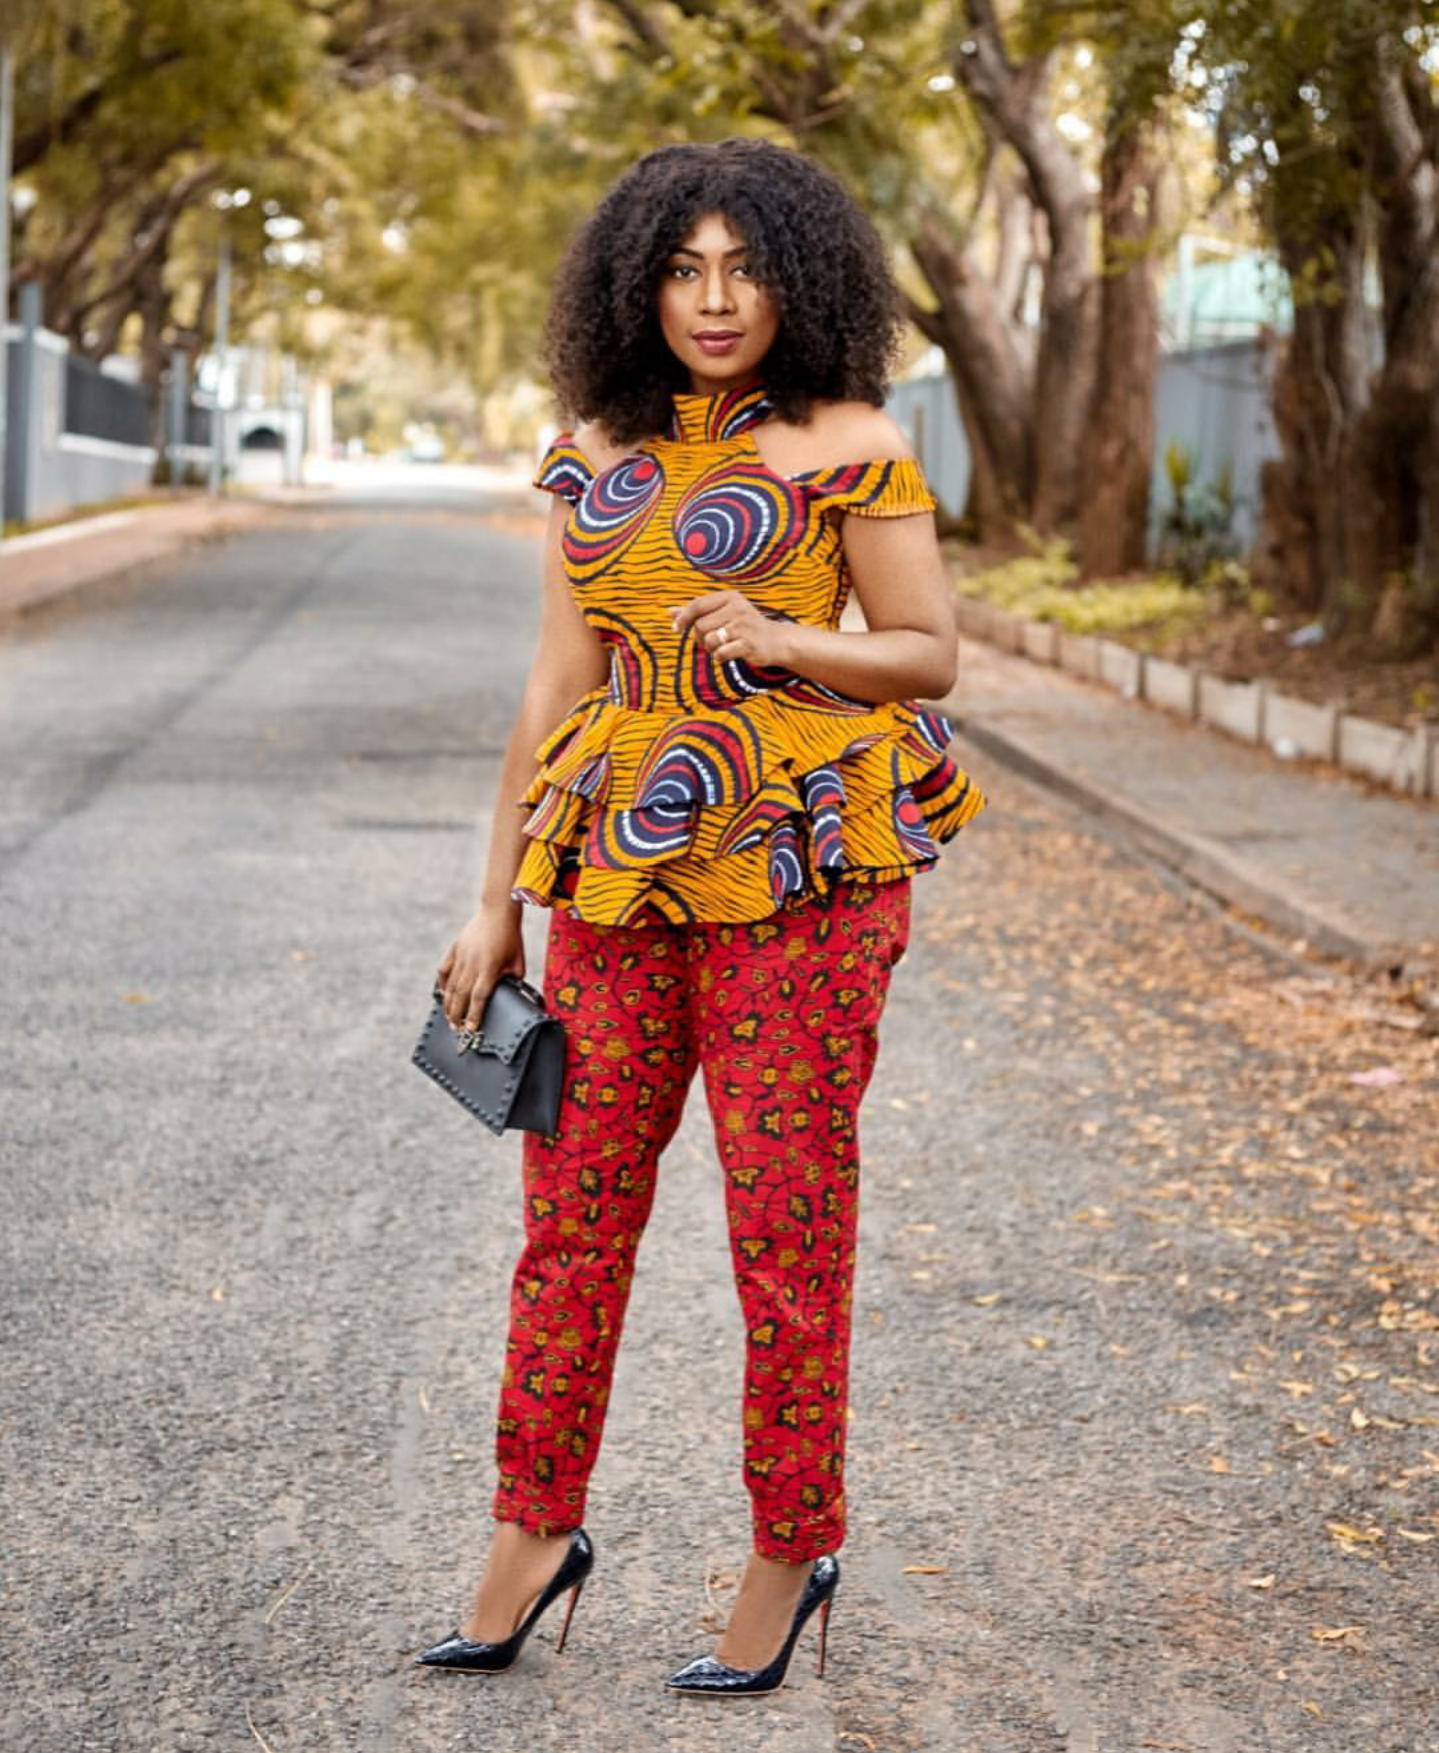 Selly Galley serving African print style goals in an off-shoulder turtle neck raffle top and pants